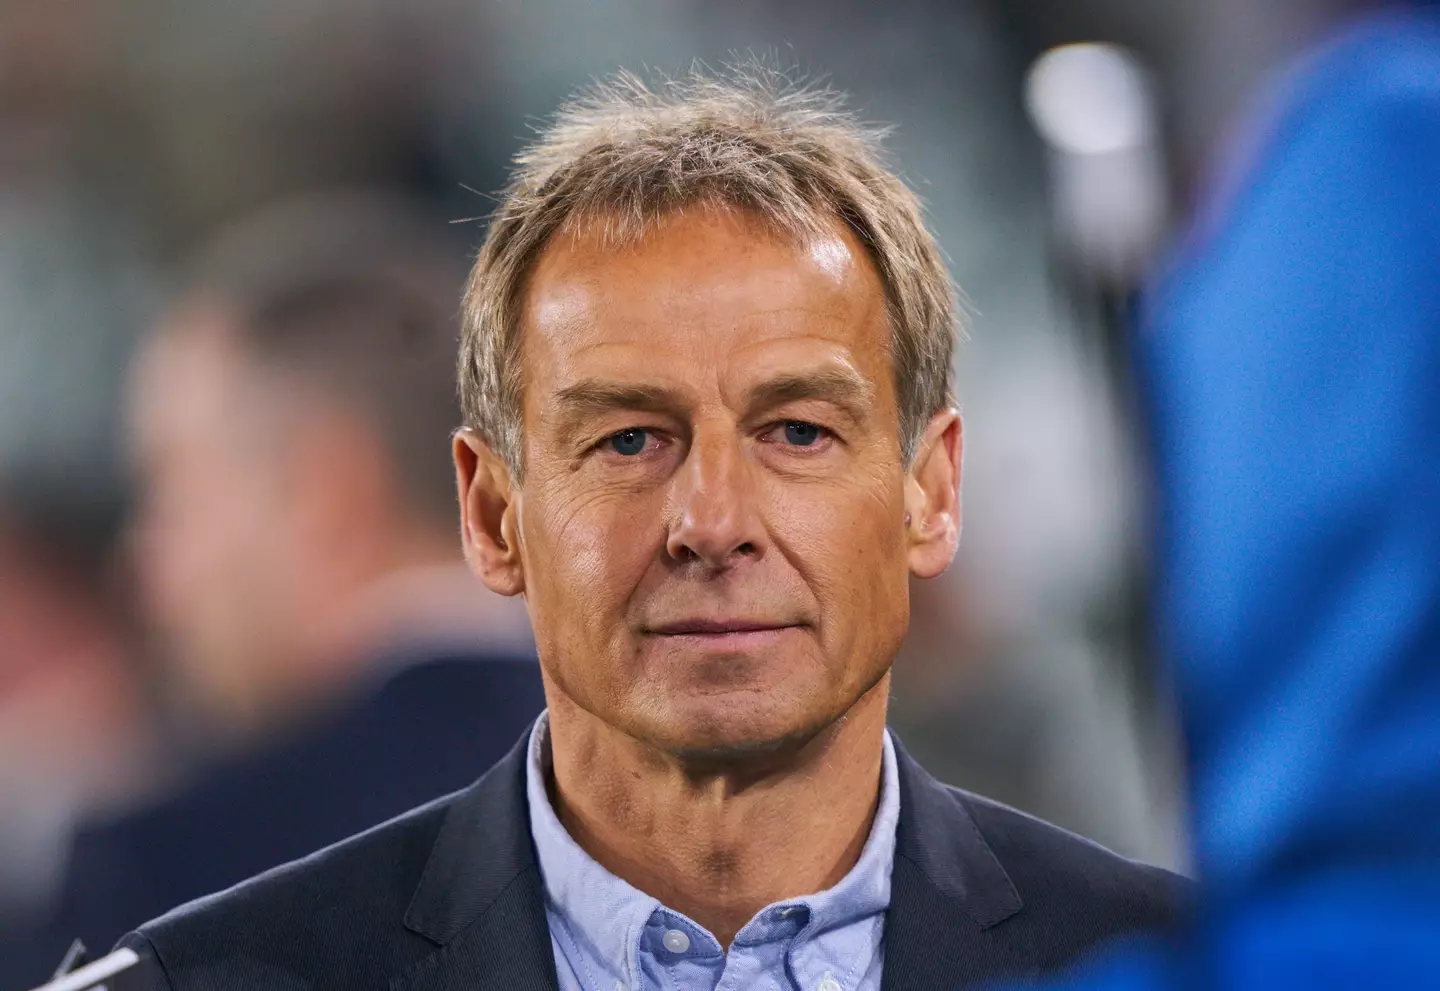 Klinsmann shared his thoughts after Wales lost to Iran.